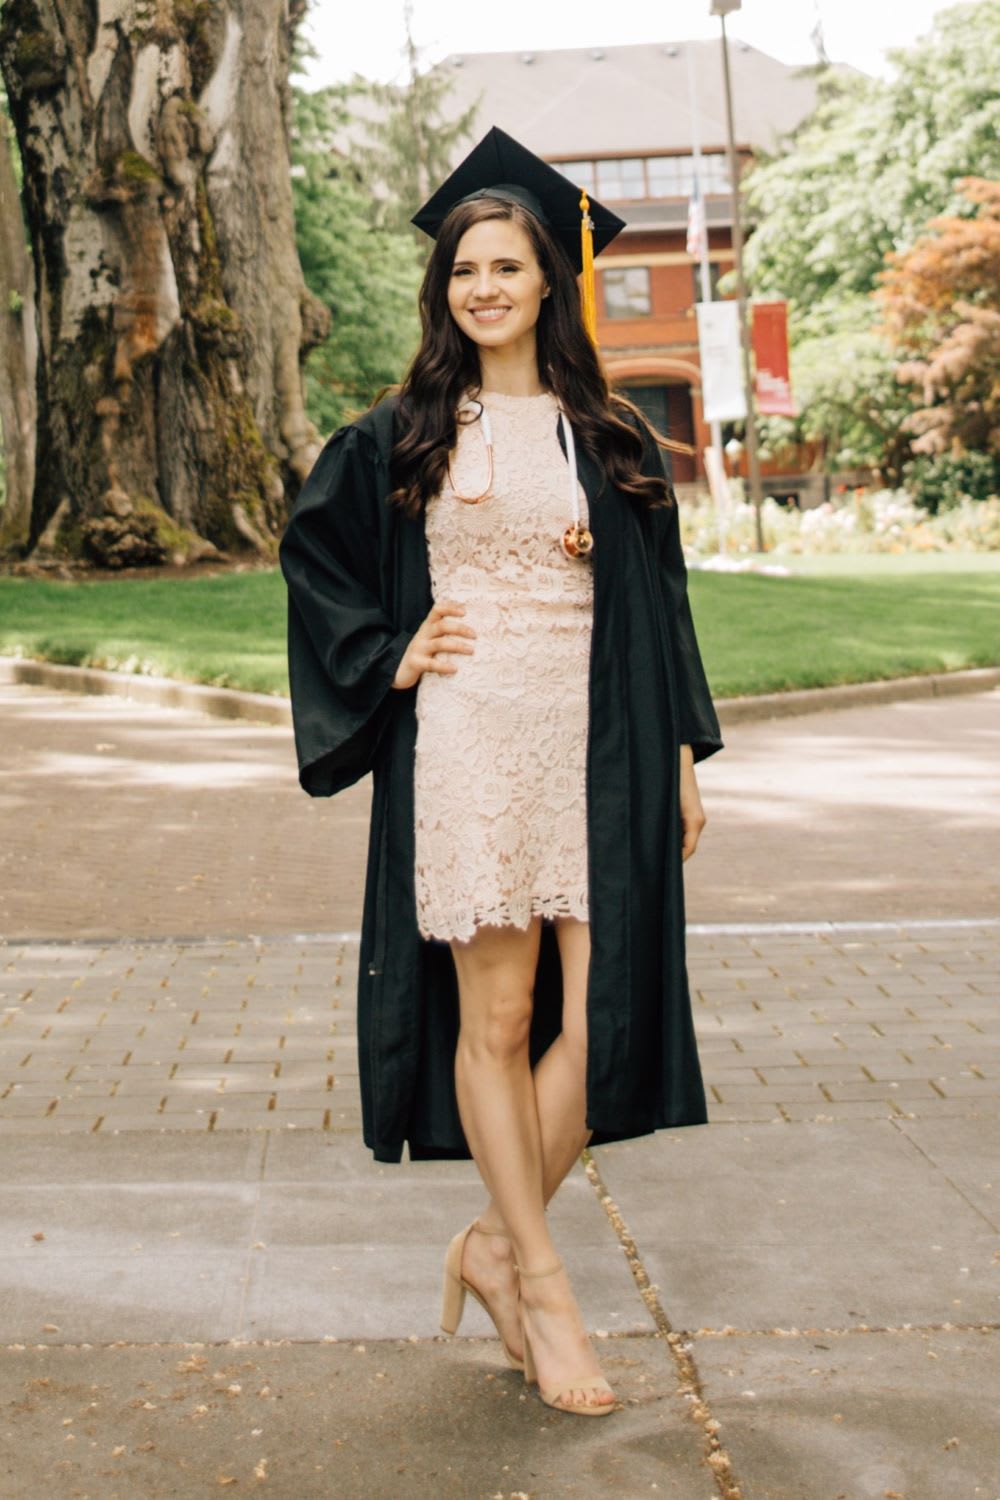 How To Choose Your Perfect Graduation Outfit - Lulus.com Fashion Blog